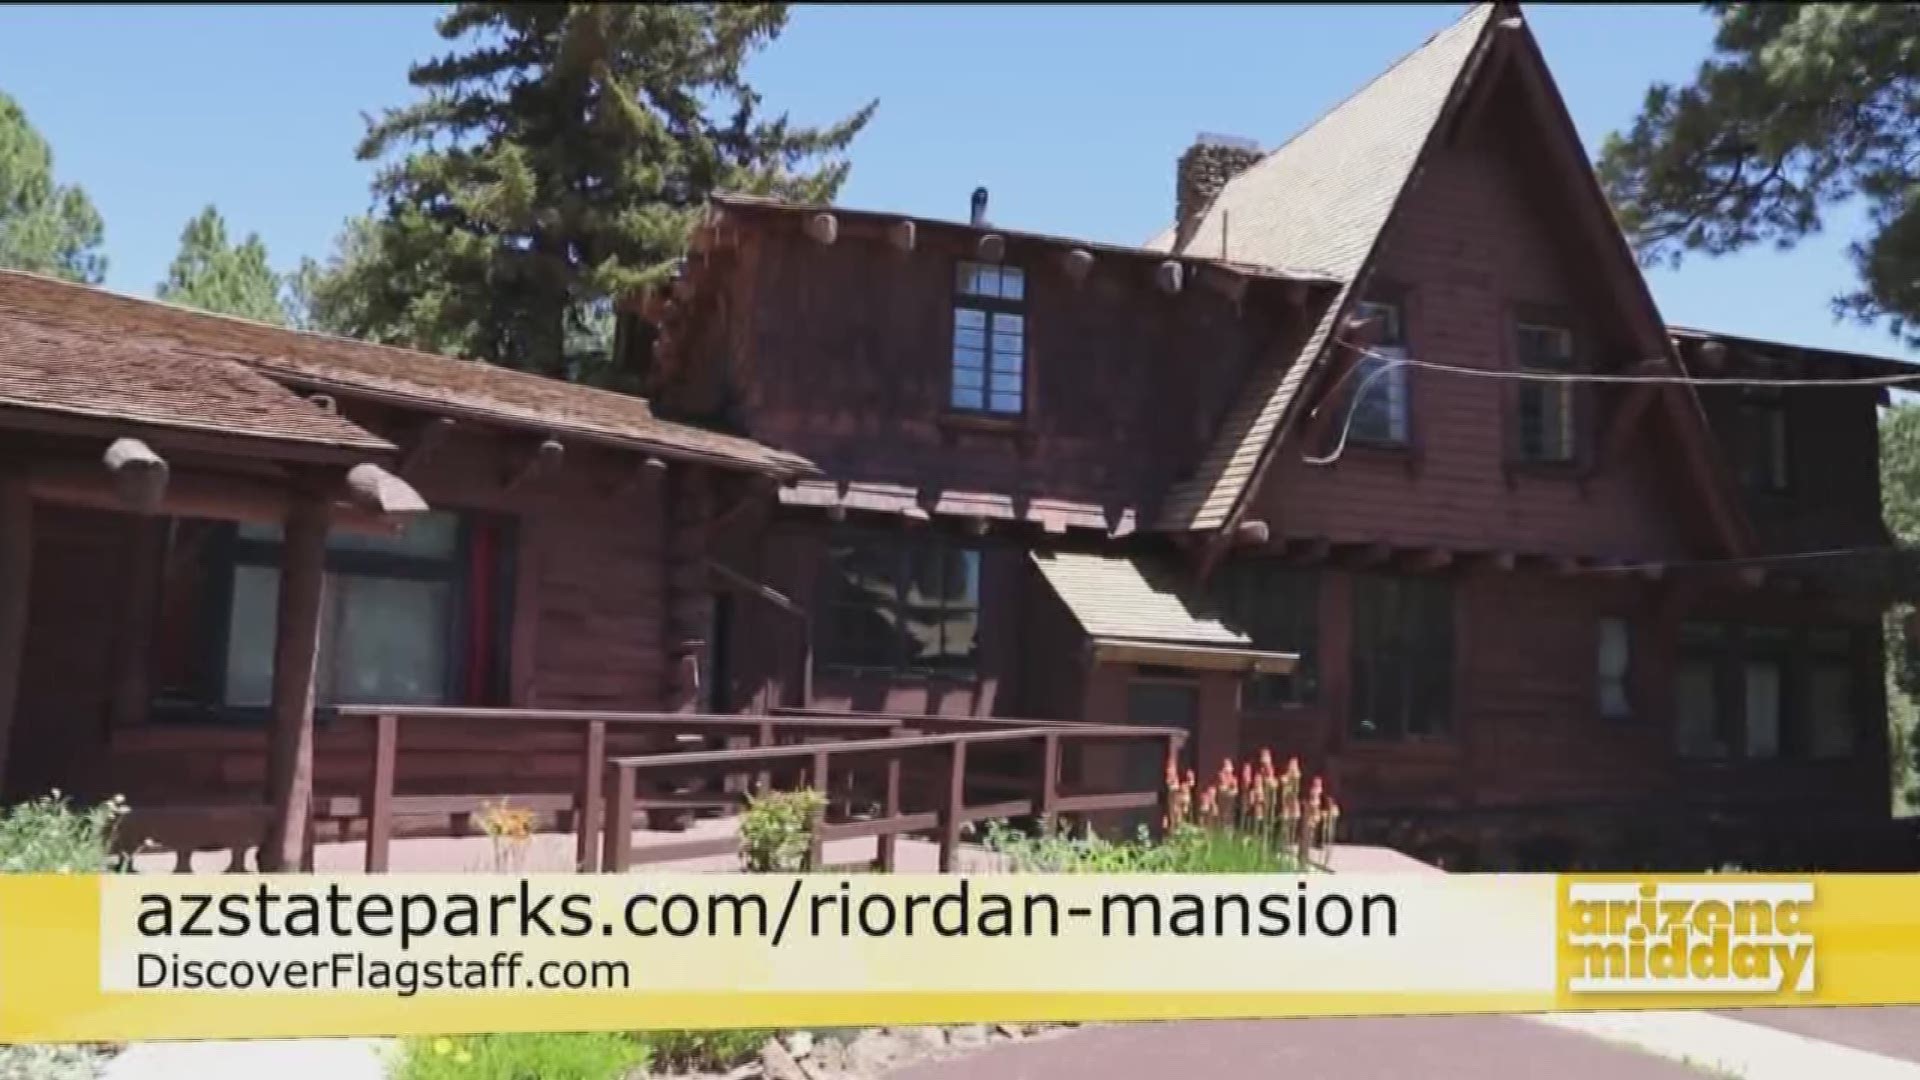 Nikki Lober from the Riordan Mansion shares the history and beauty behind the mansion